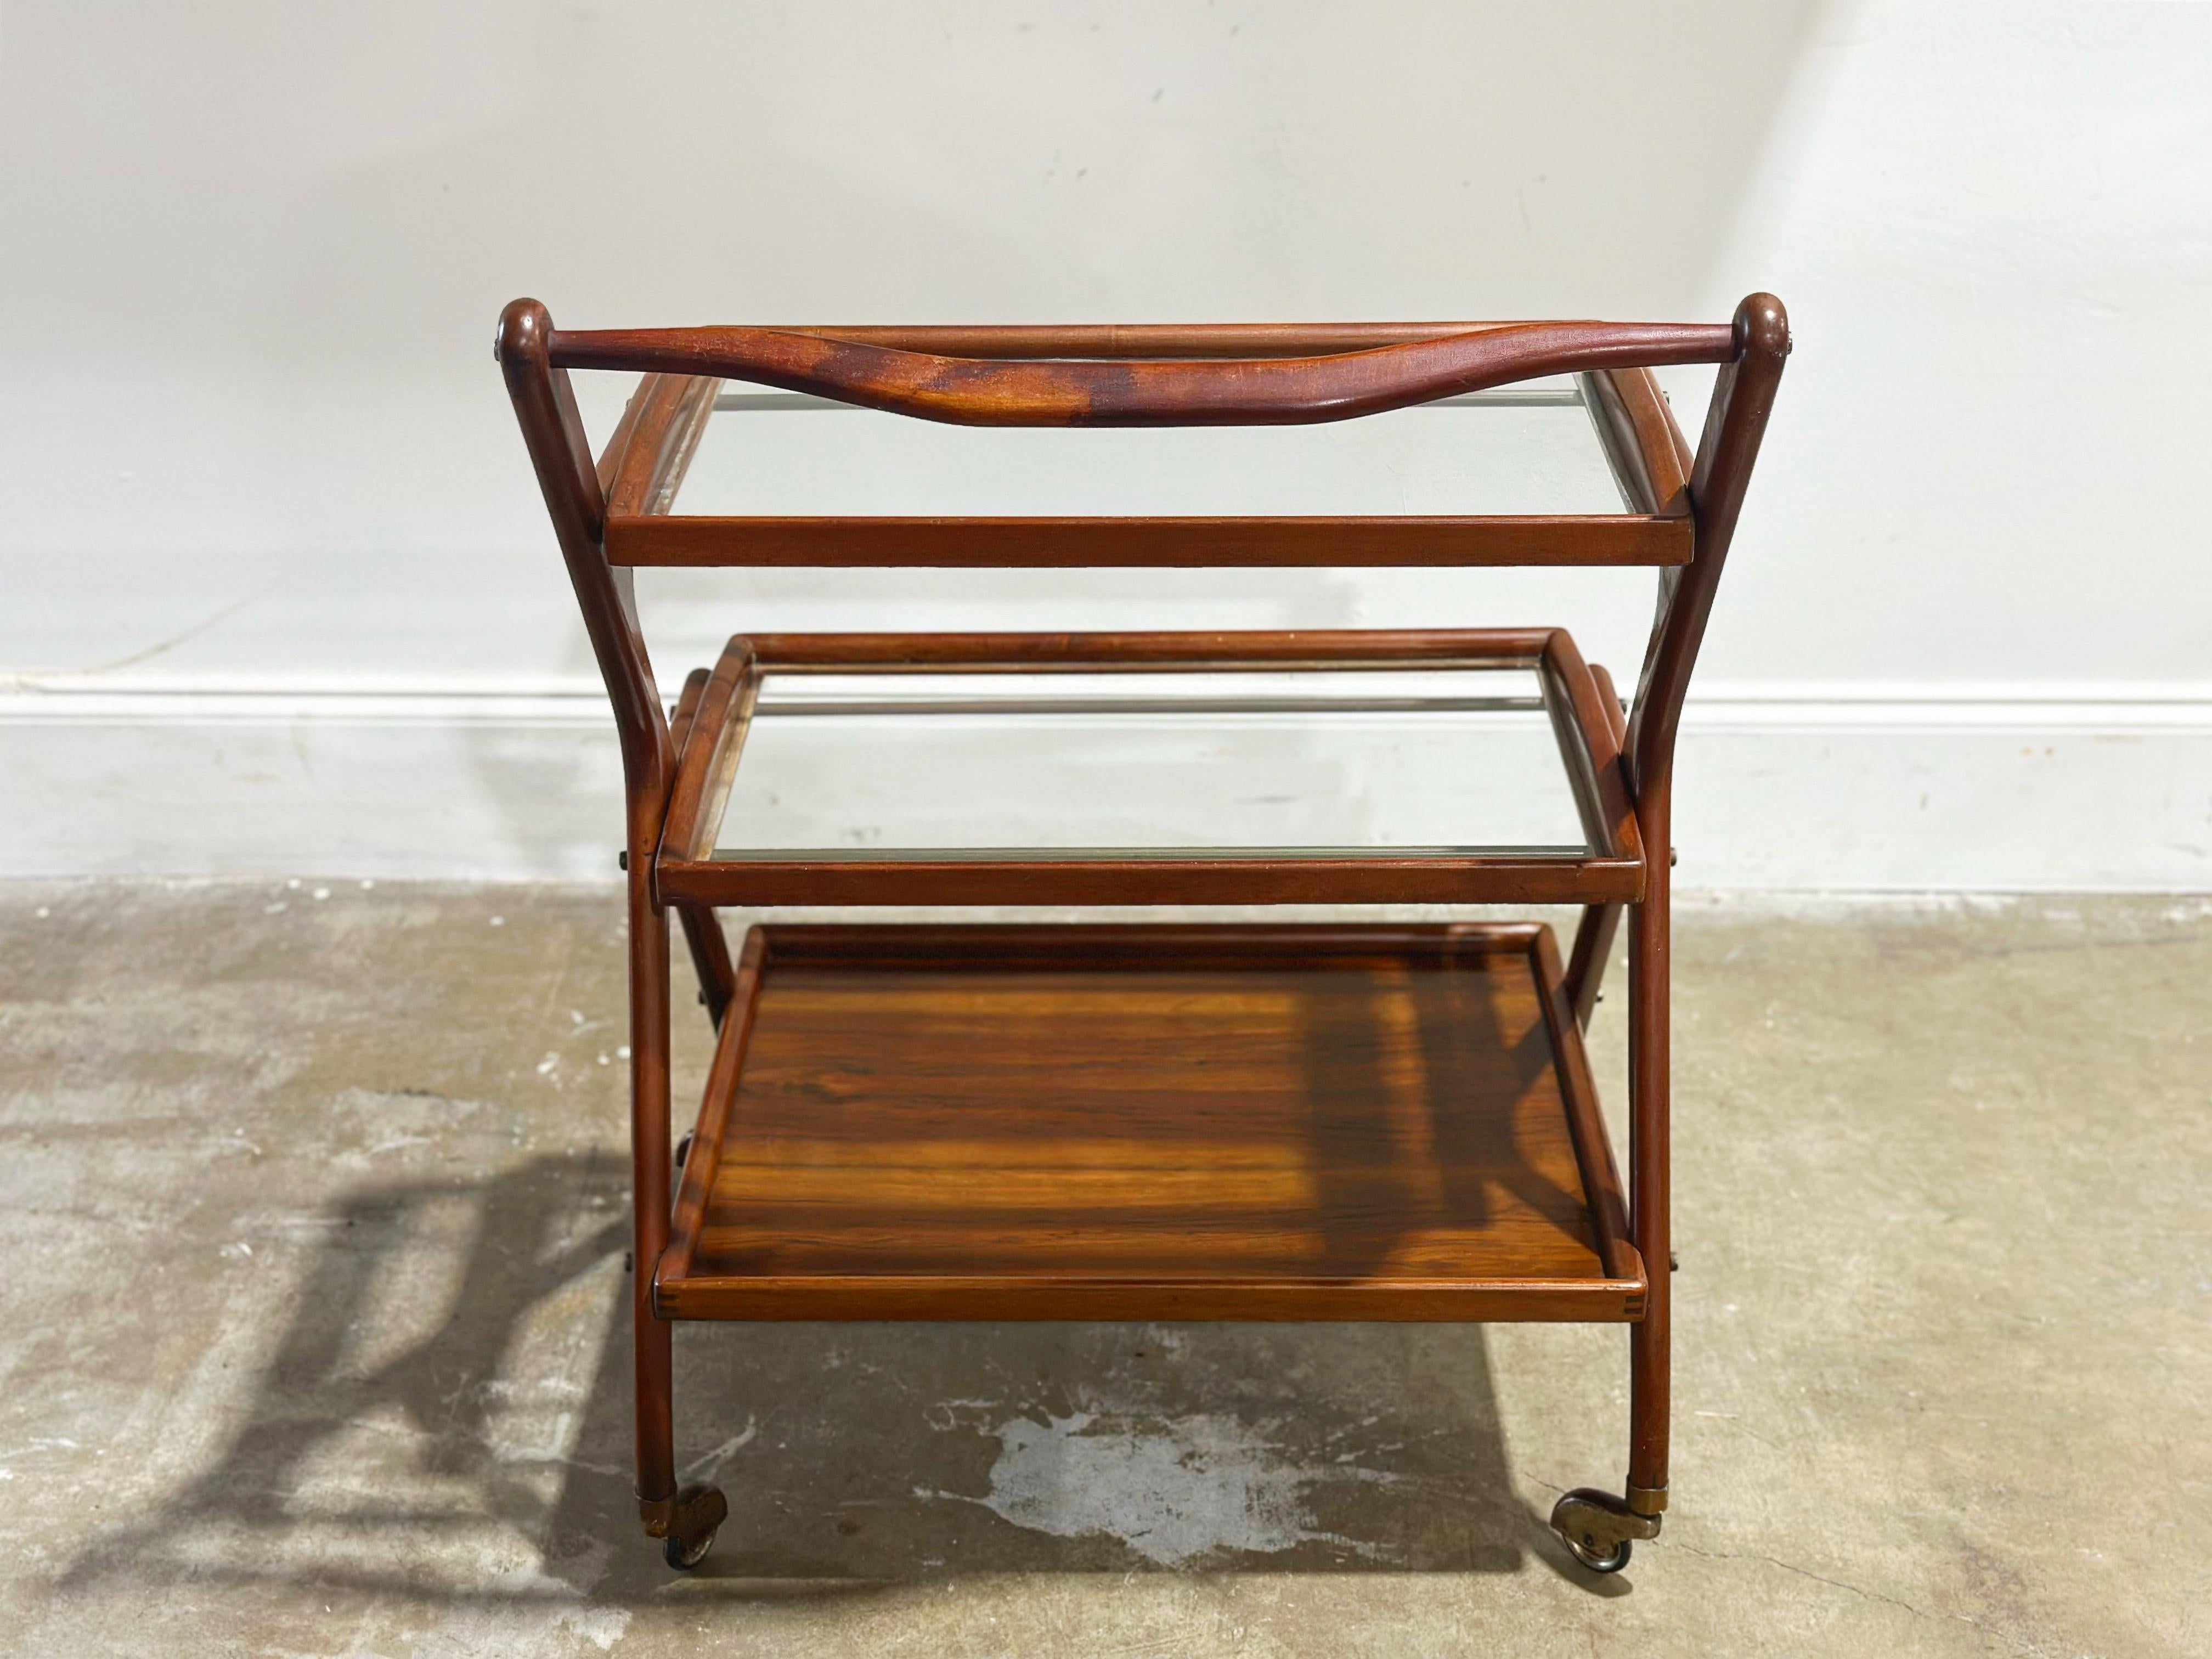 Mid-20th Century Mid Century Modern Serving Cart after Ico Parisi - Italy circa 1950s - Mahogany For Sale